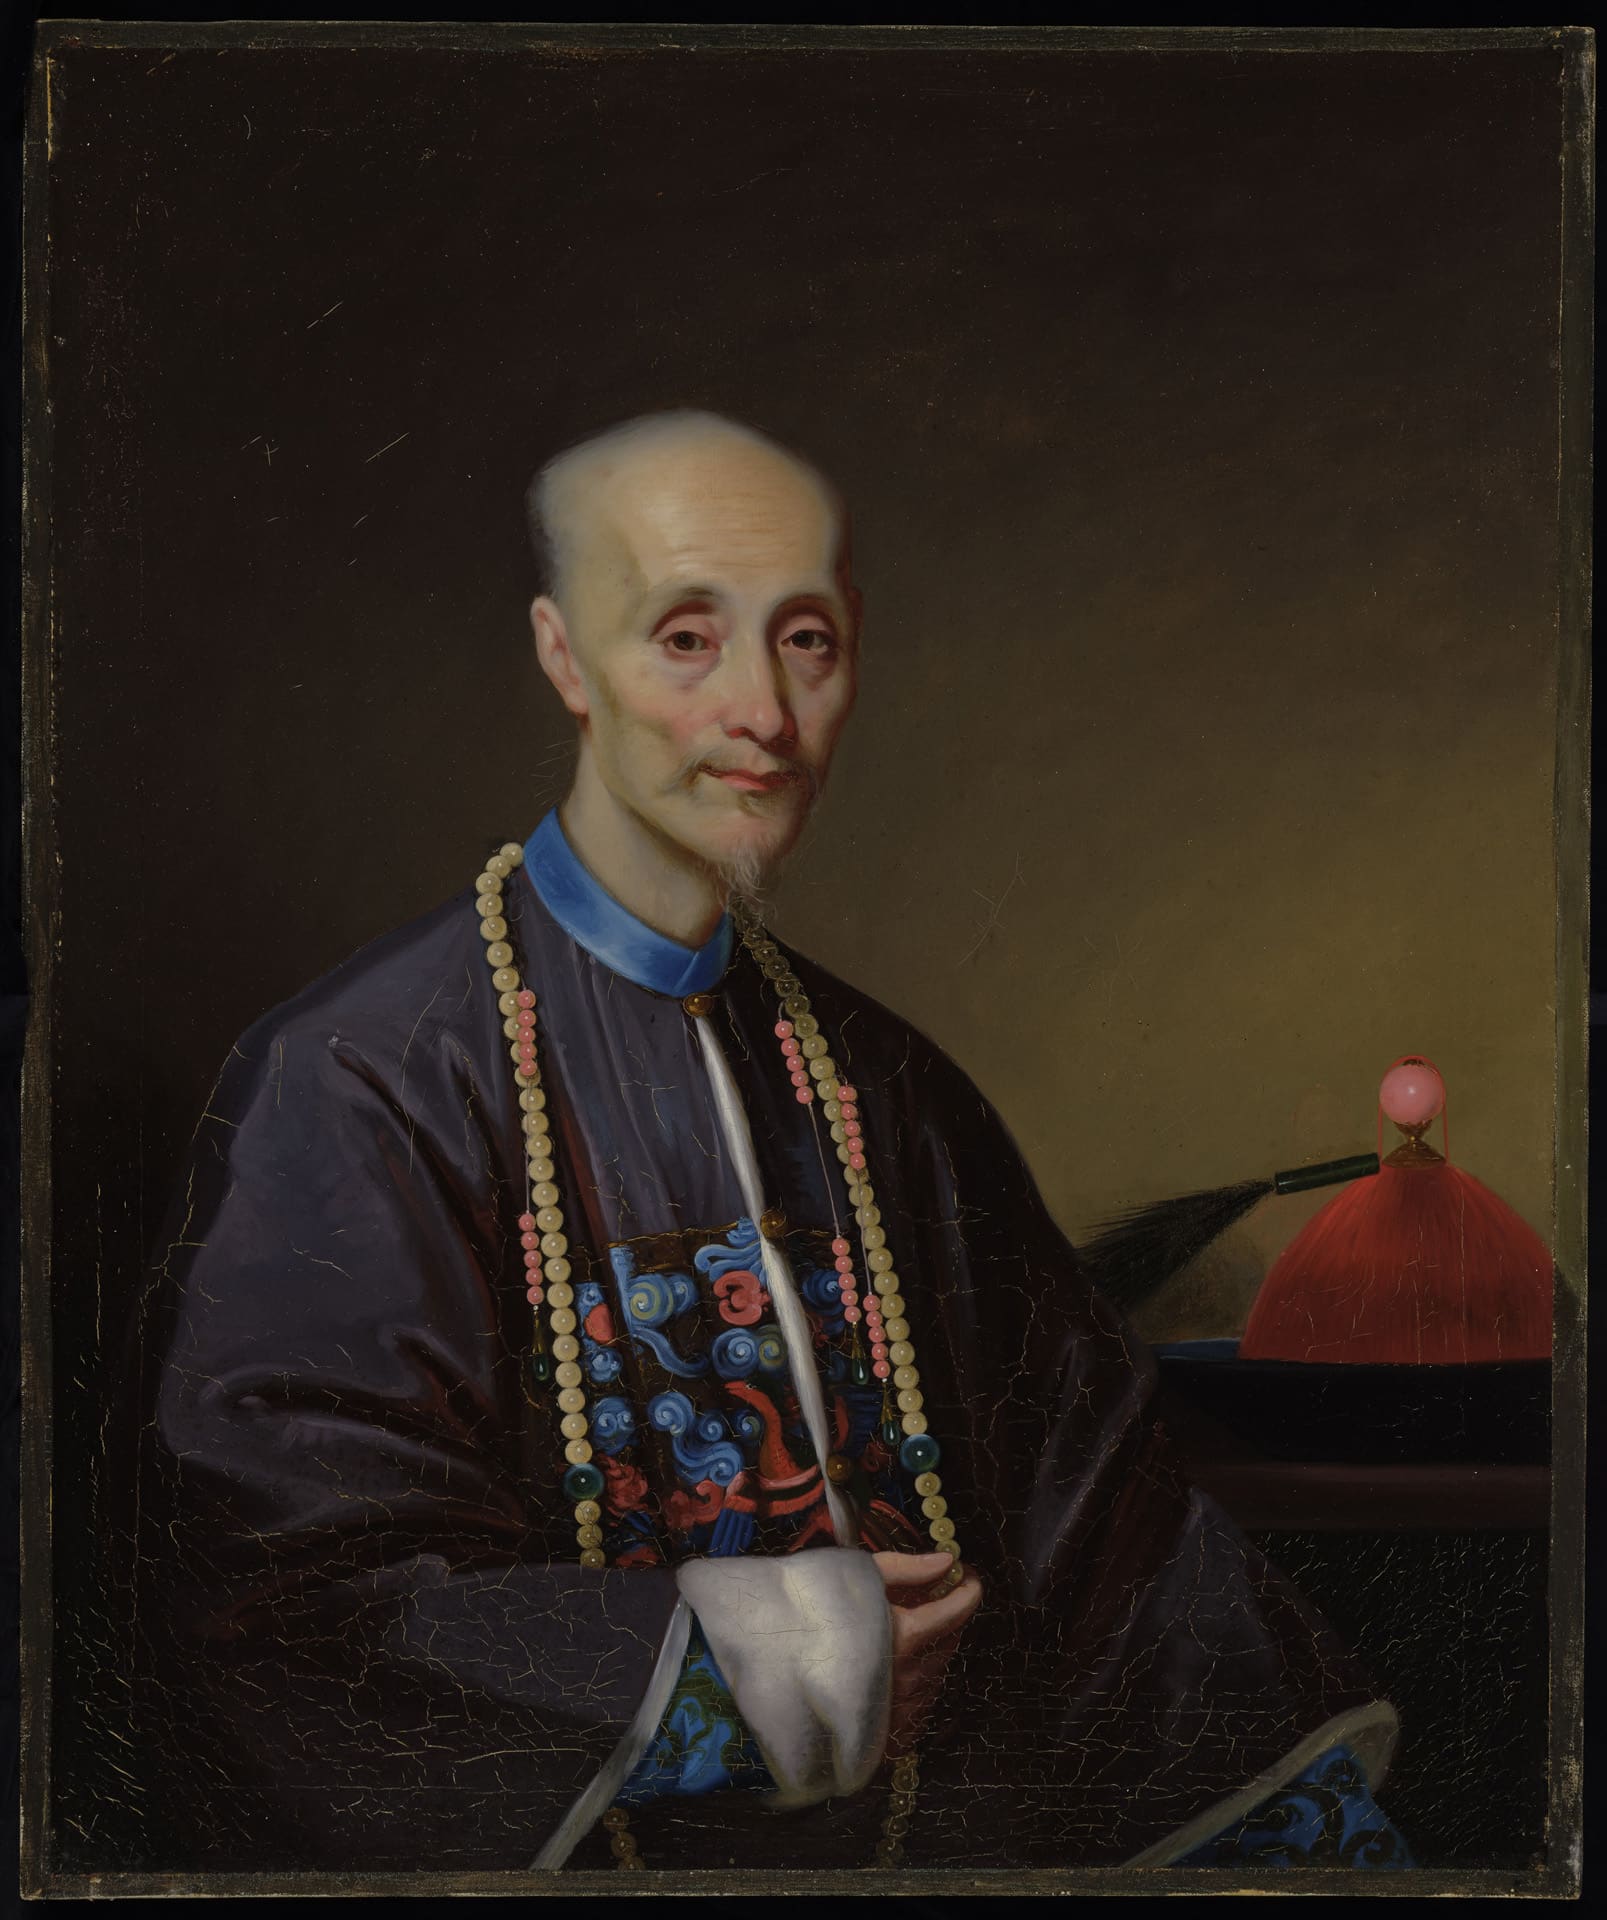 a portrait of Howqua, a Chinese merchant, dressed in court robes